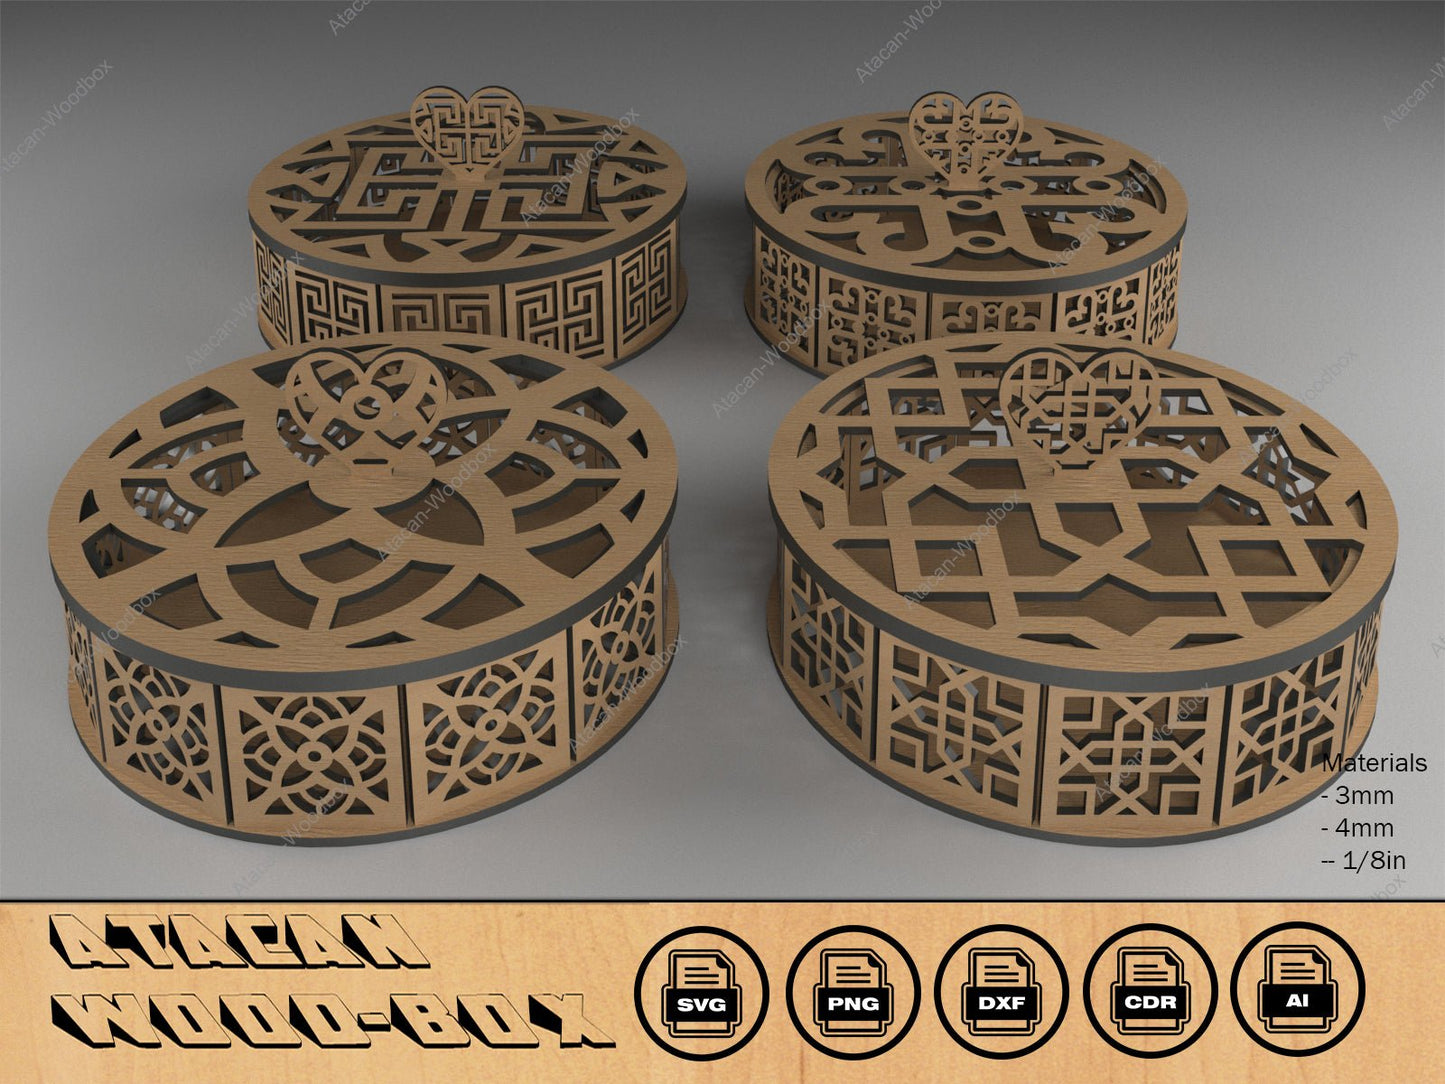 Wooden Decorative Round Boxes / Laser Cut Box Files / Glowforge Wood Vector Cutting Plans SVG DXF Ai CDR 399